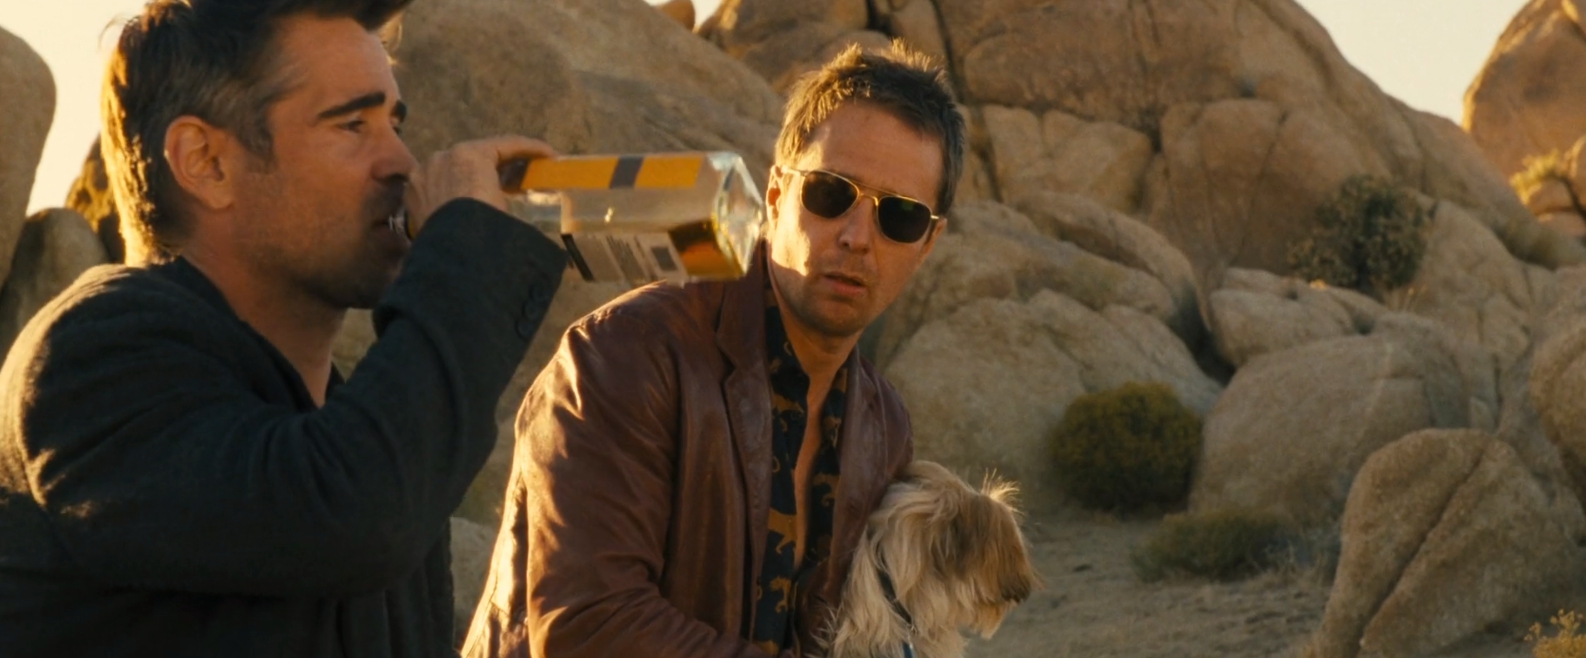 Seven Psychopaths Movie Review